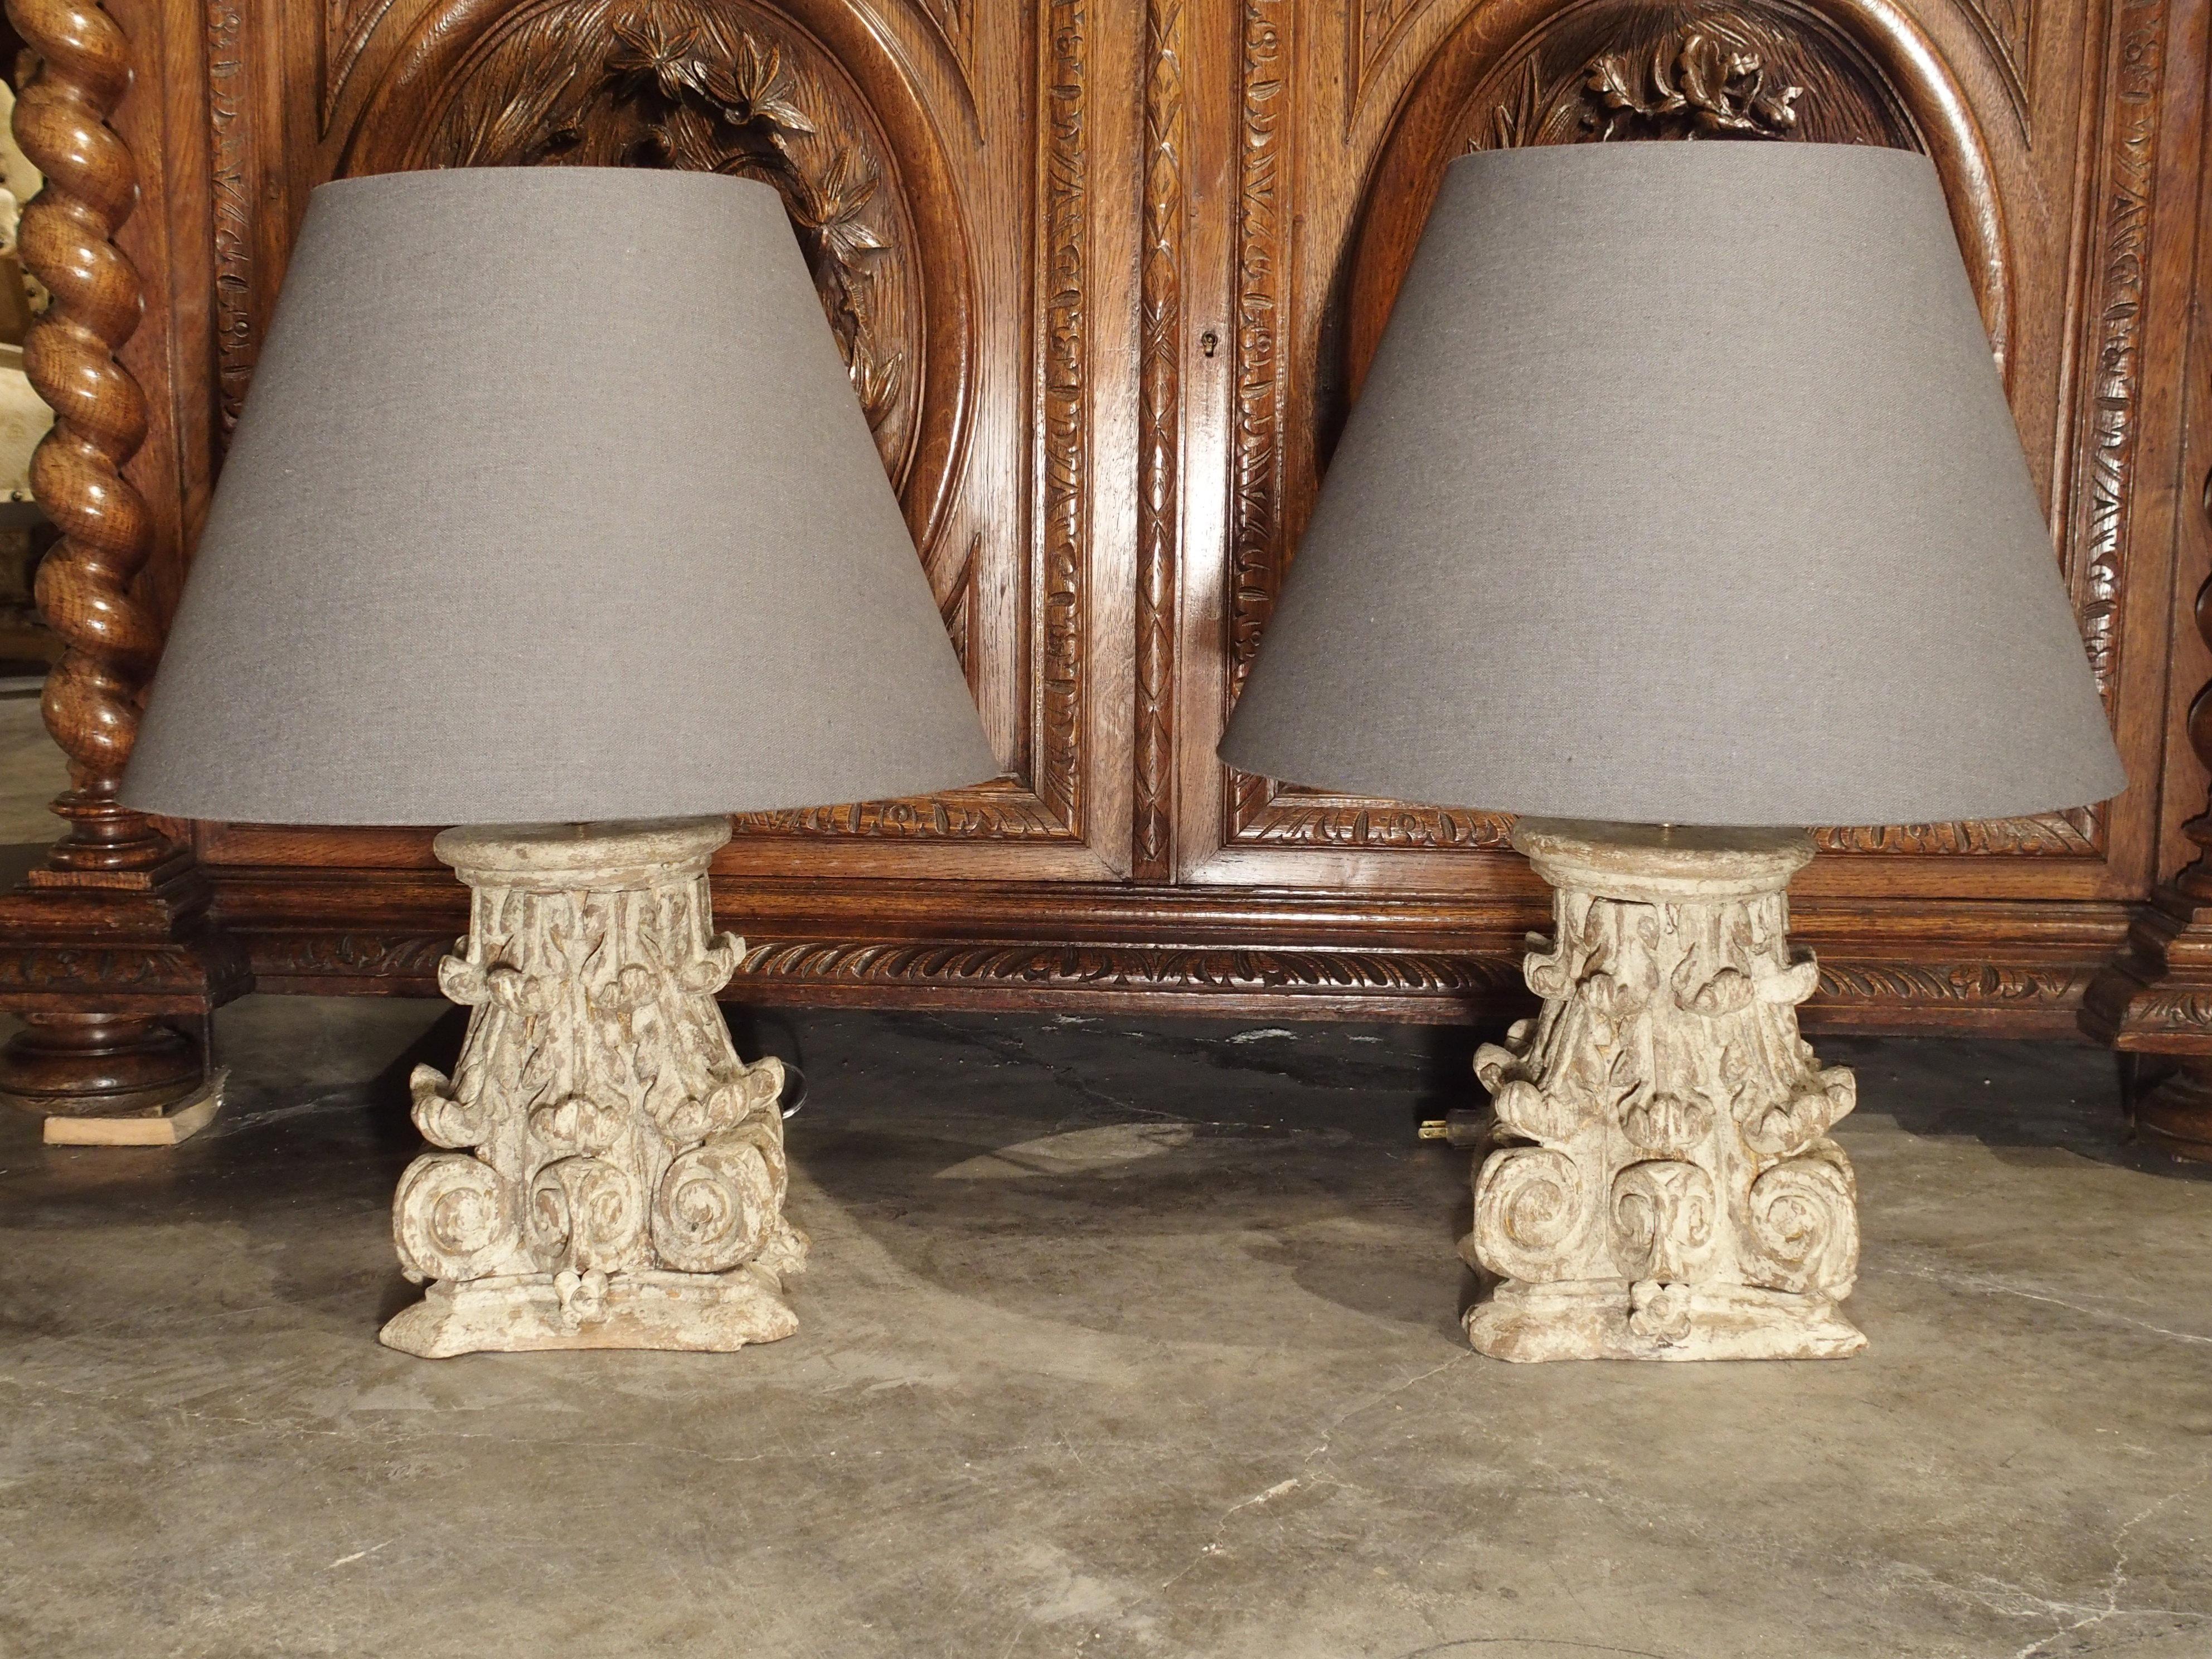 This pair of 18th century French oak column capitals have been turned into wonderful table lamps. The capitals are Corinthian style with acanthus leaf motifs, and they have a nice, worn whitewash parcel paint finish. We had them wired for use in the